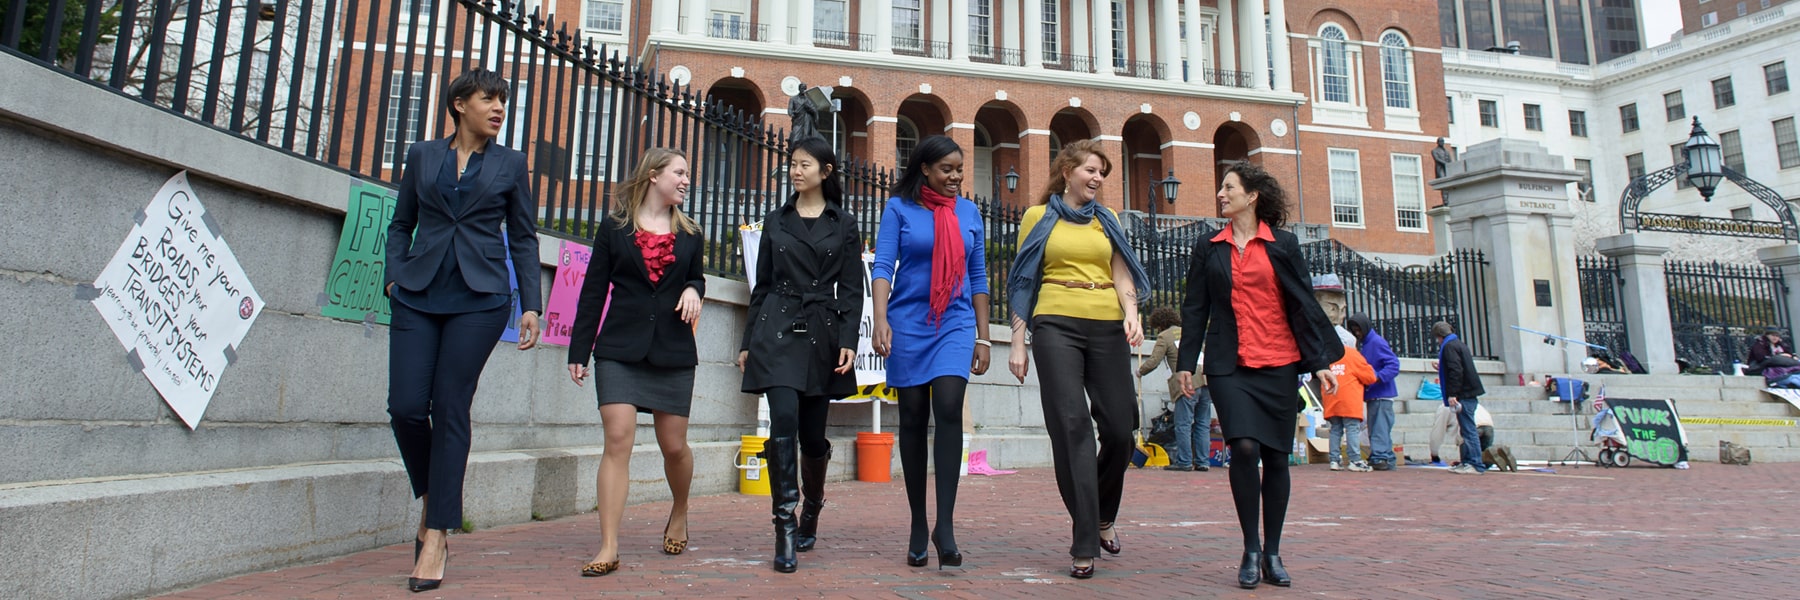 women in casual business attire walking in front of Massachusetts State House